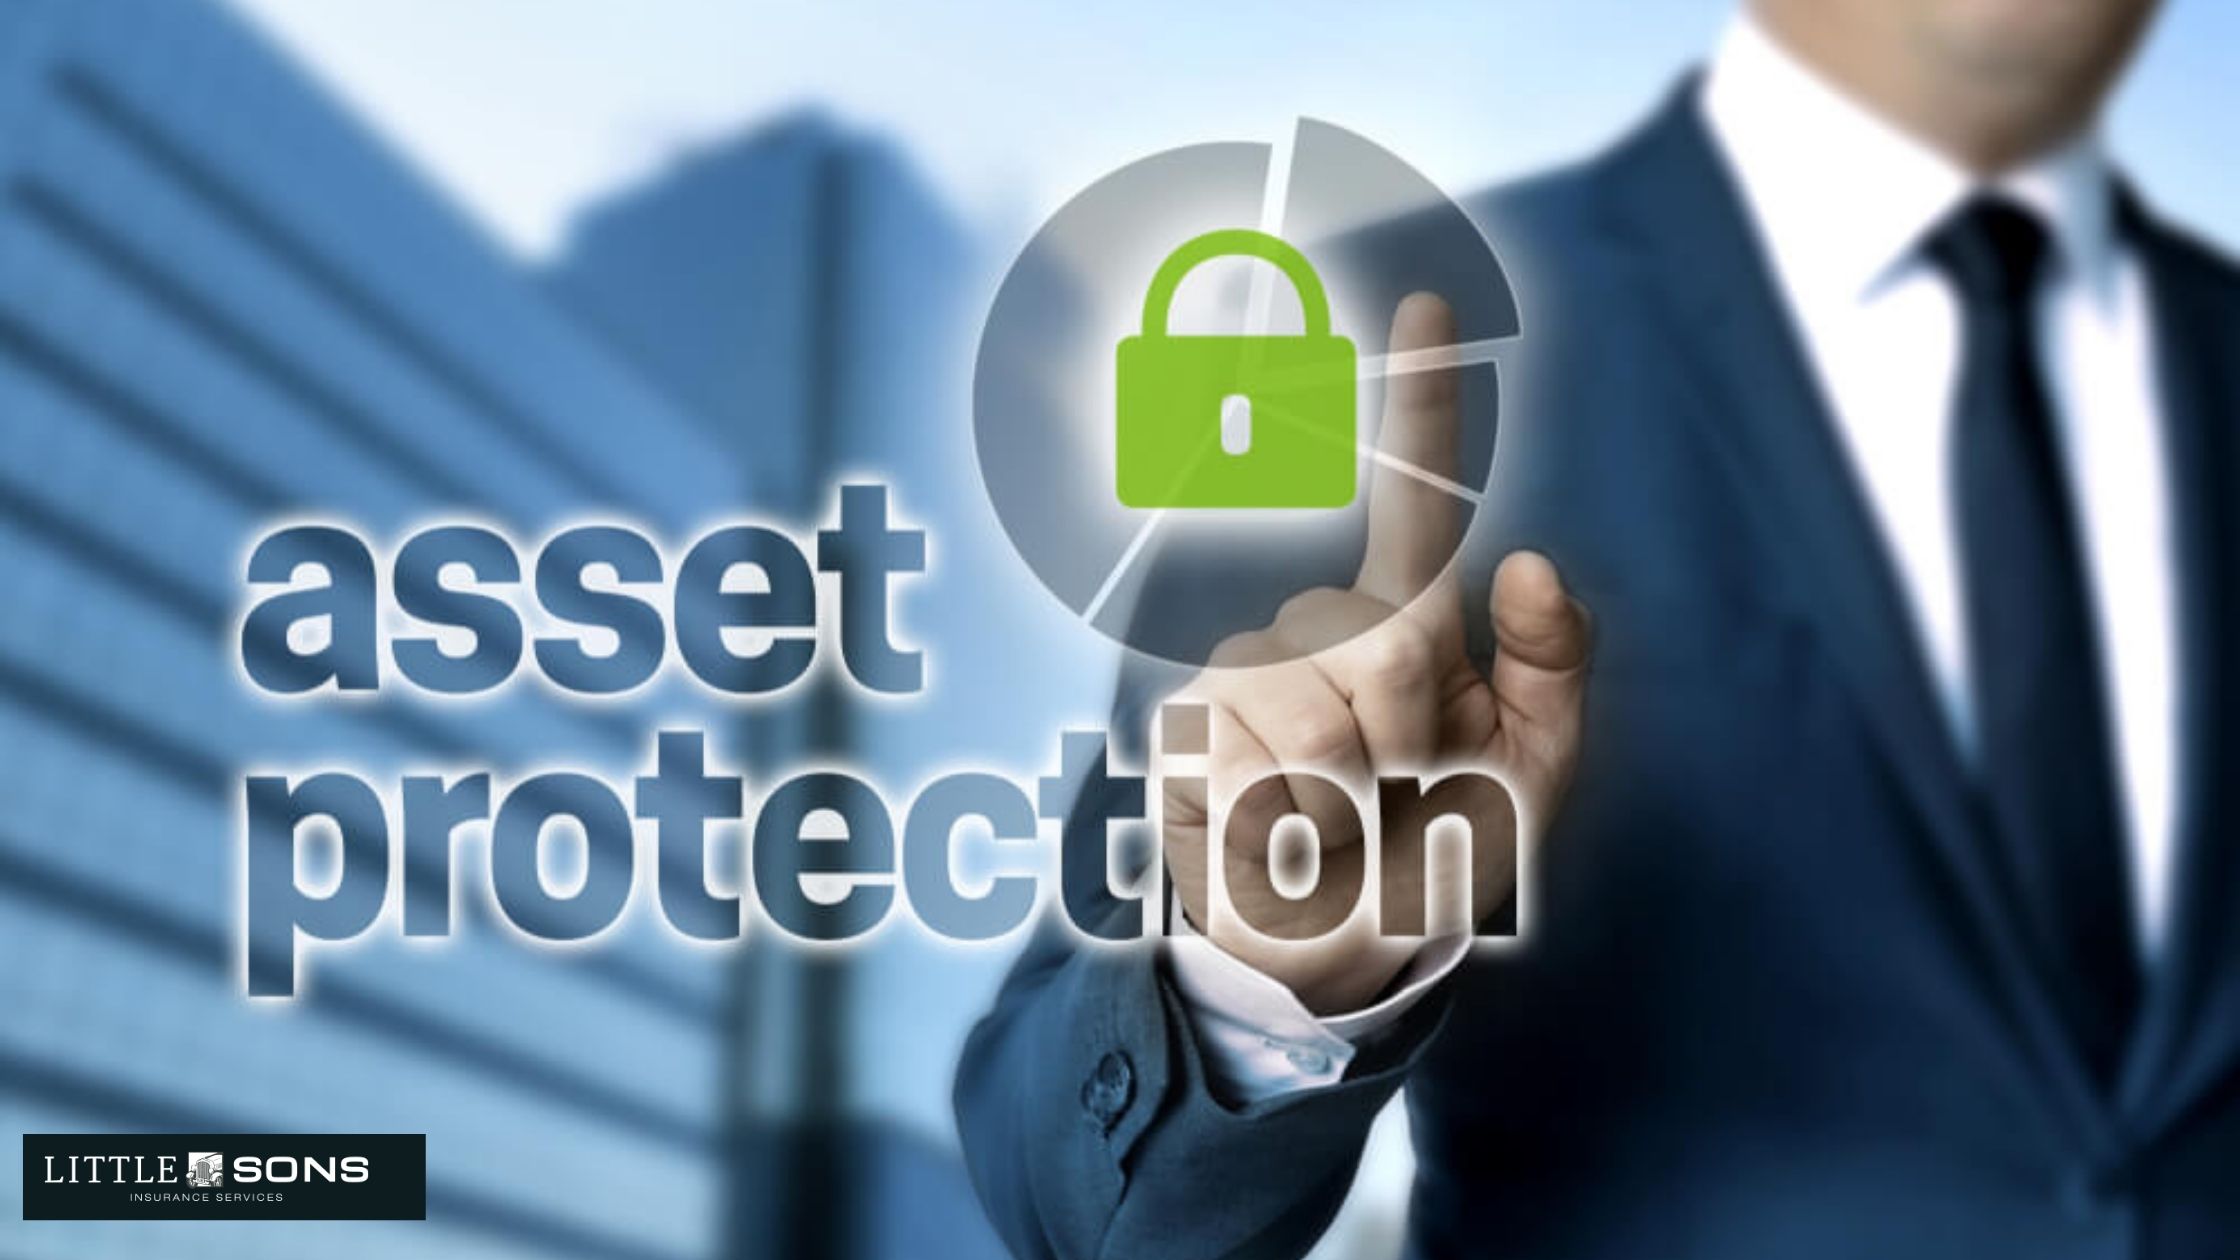 Asset Protection for Business Owners: What You Need to Know